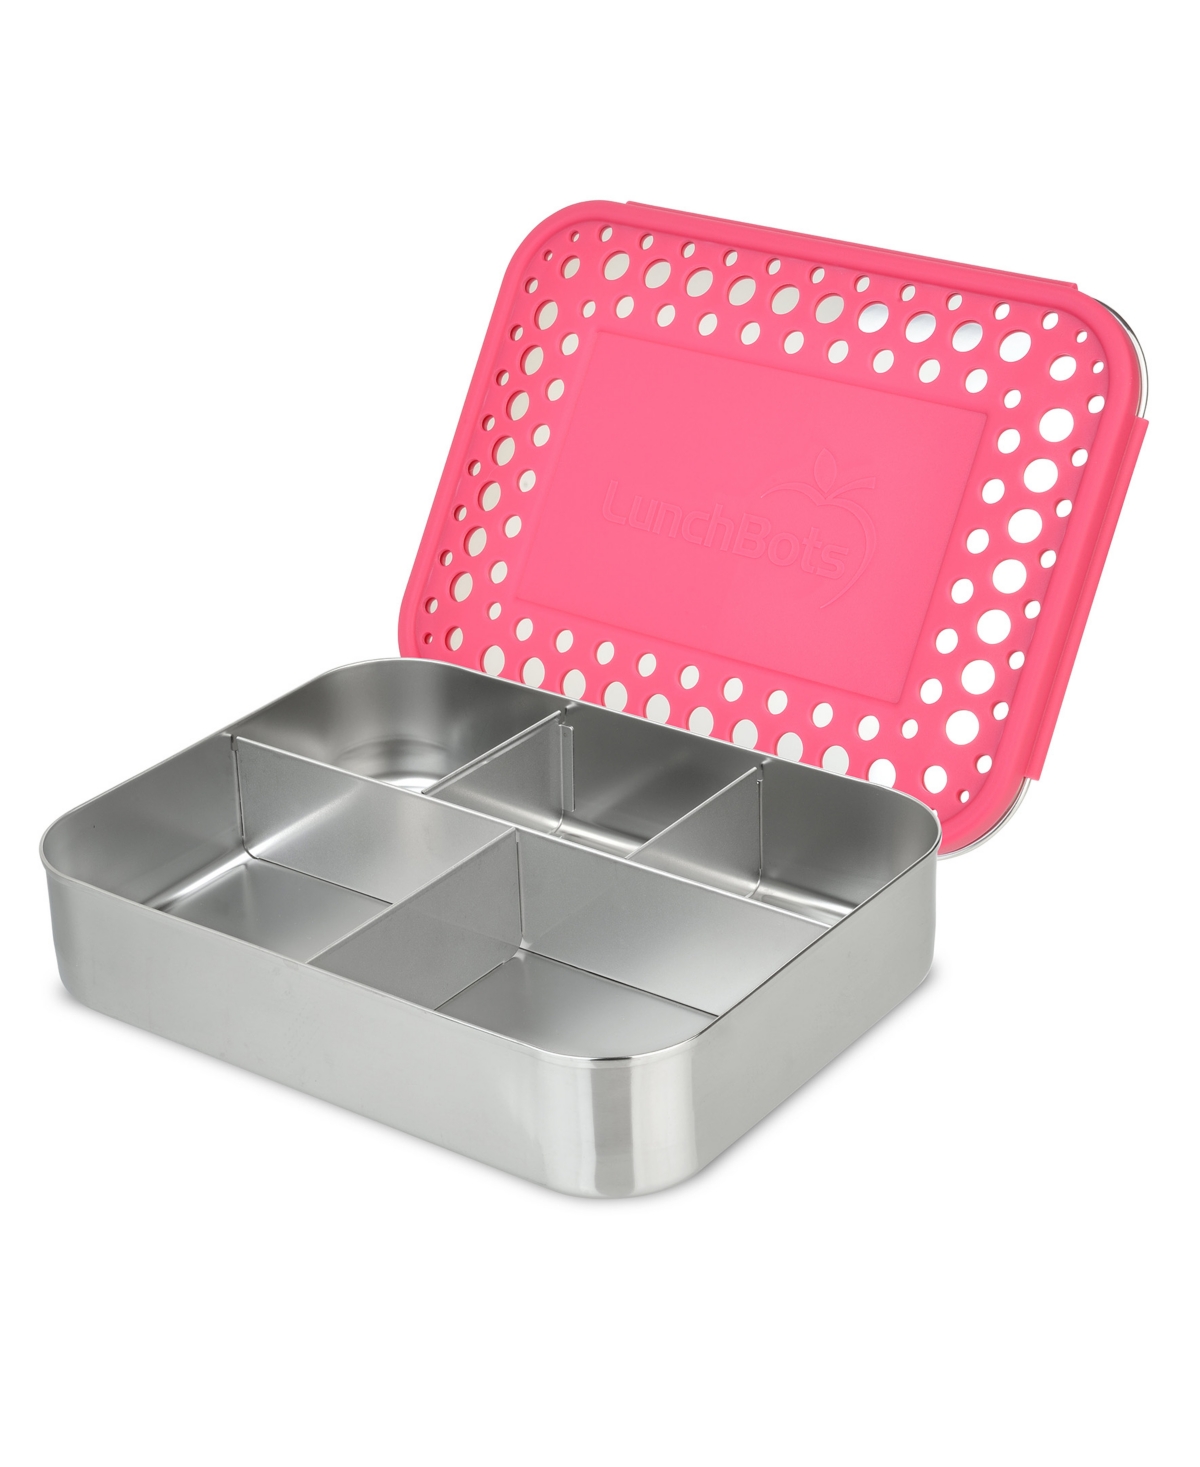 Lunchbots Large Stainless Steel Bento Lunch Box 5 Sections In Pink Dots